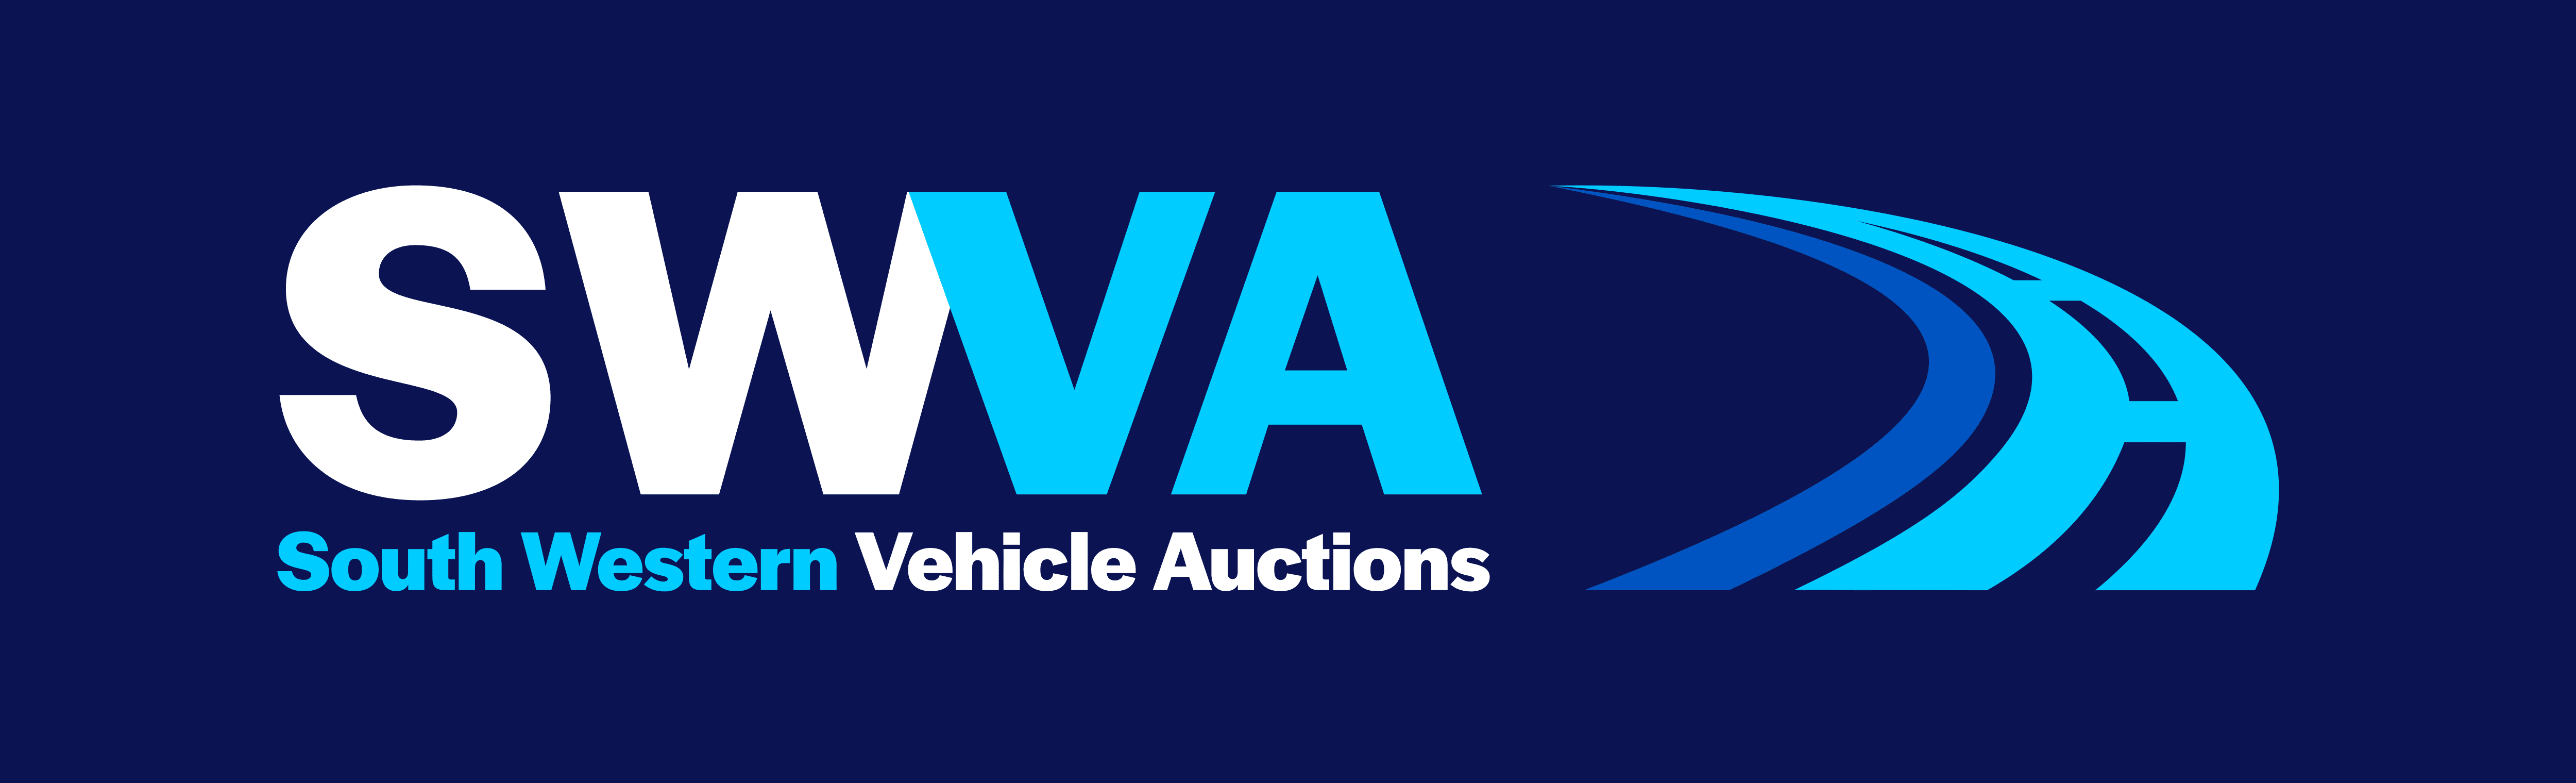 South Western Vehicle Auctions Ltd